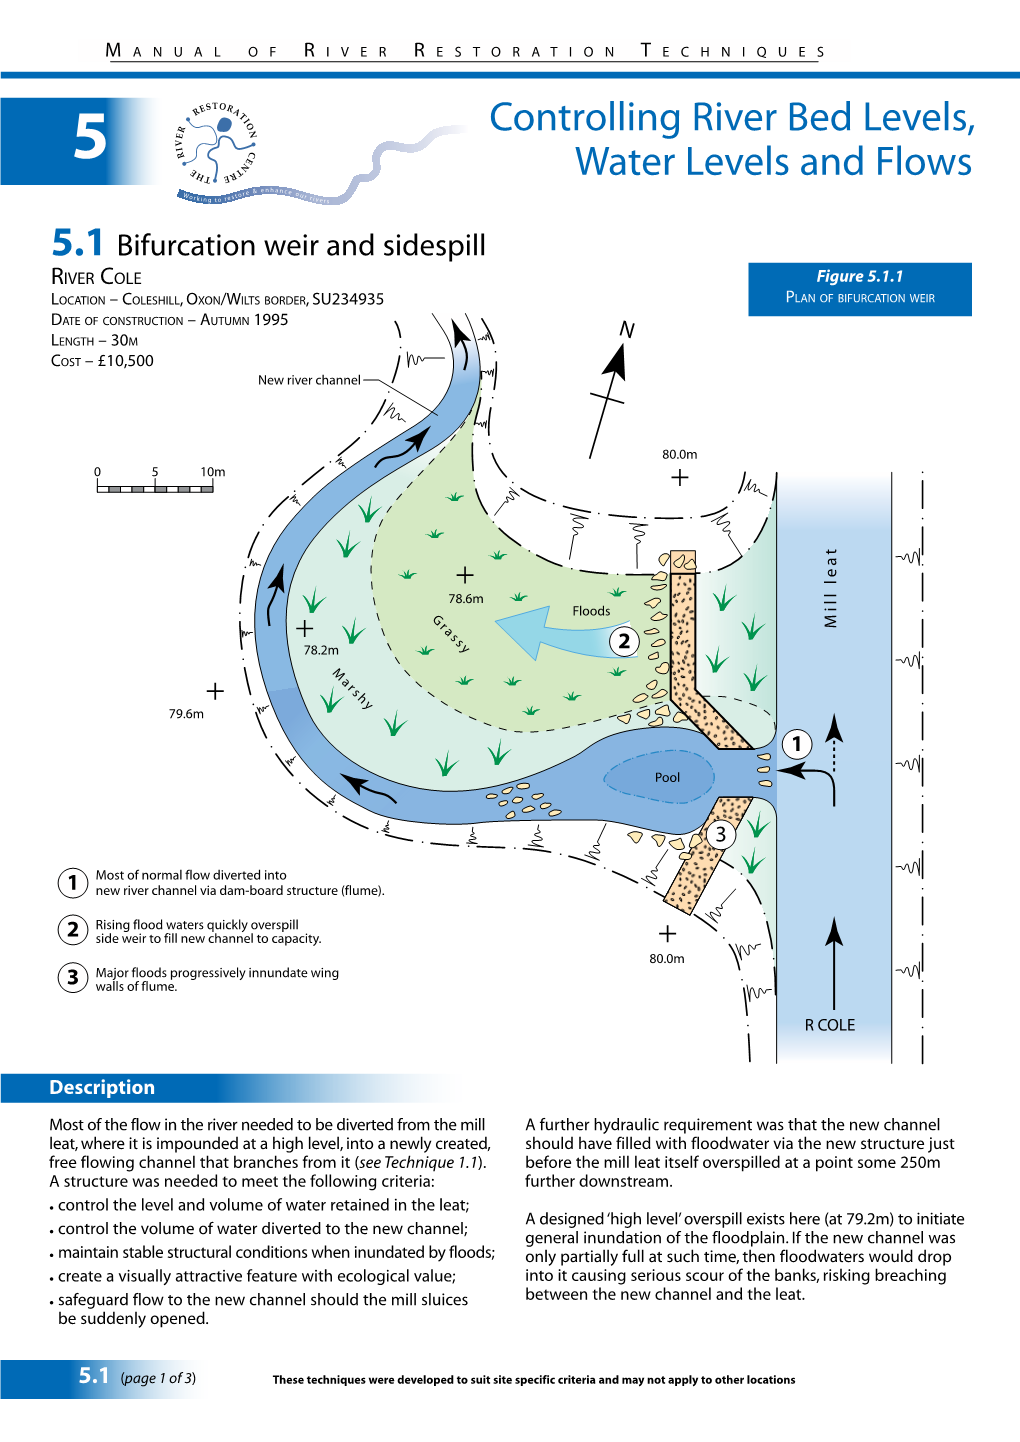 Controlling River Bed Levels, Water Levels and Flows 5